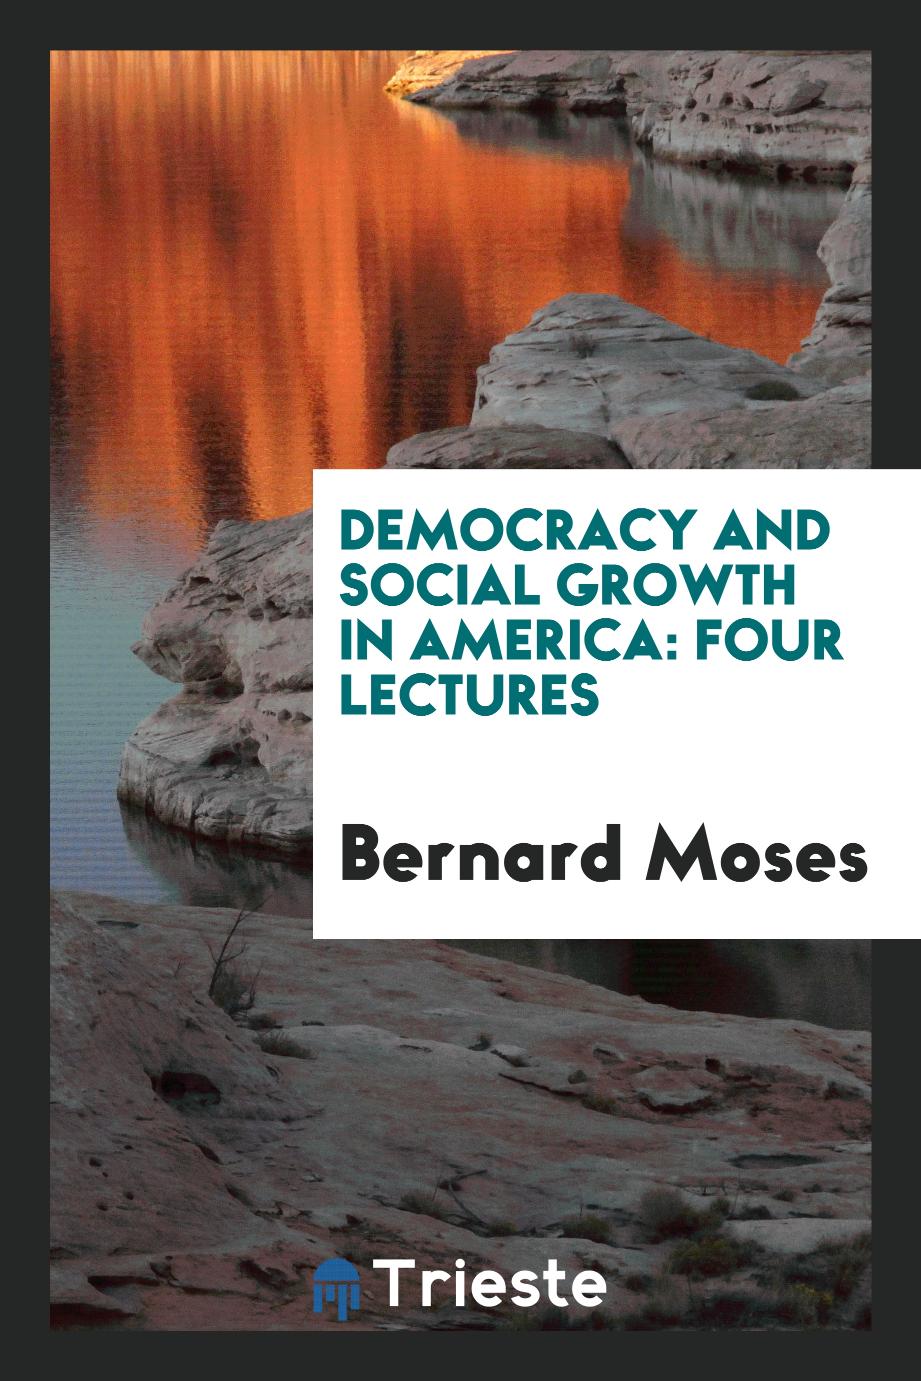 Democracy and Social Growth in America: Four Lectures